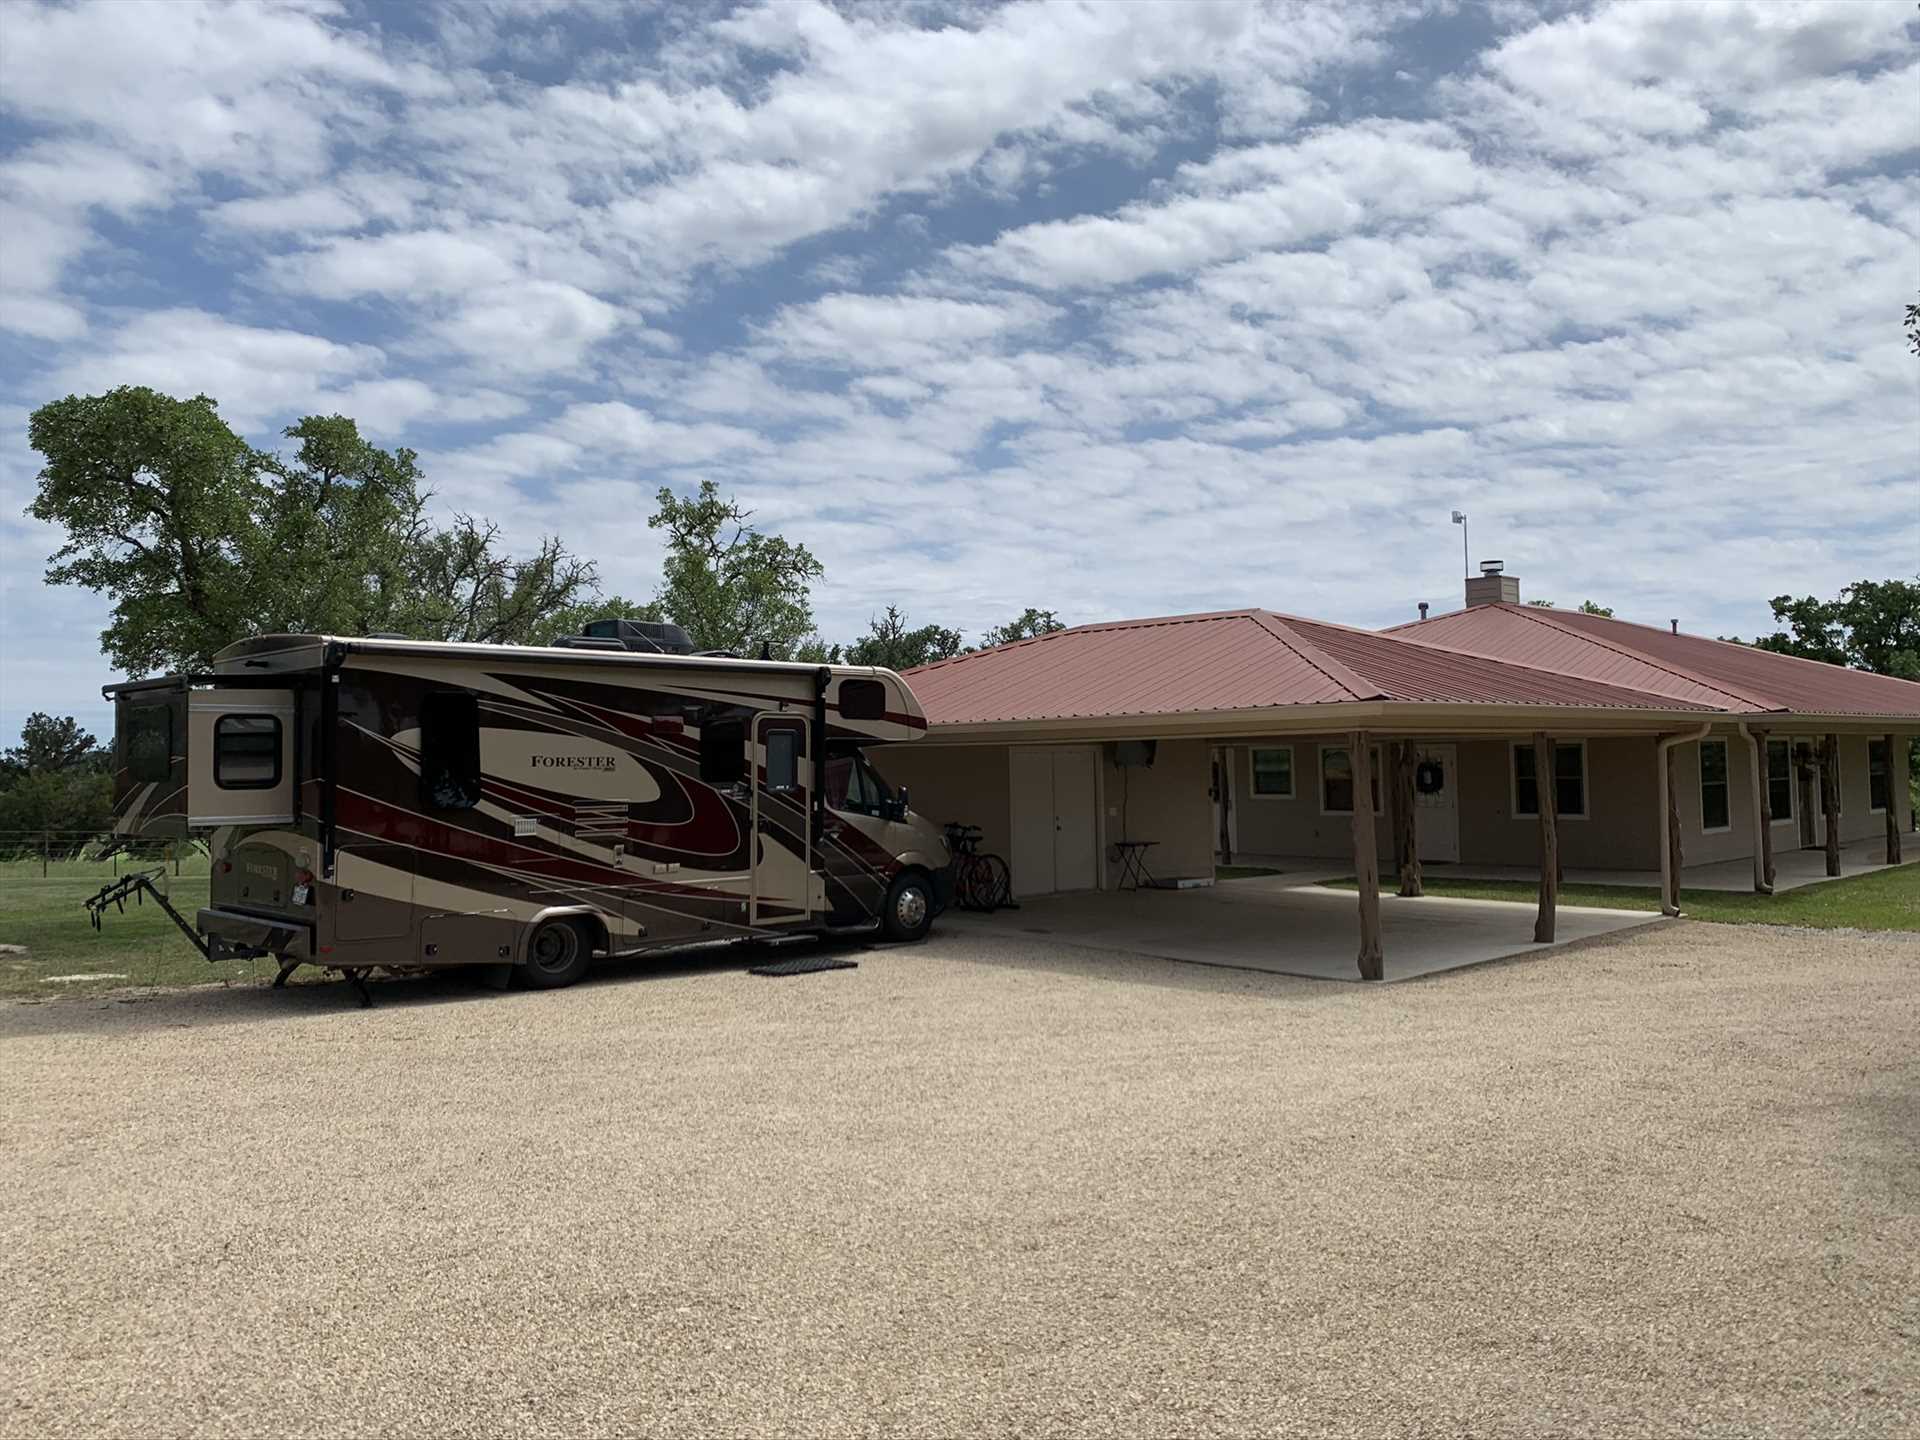                                                 Bringing an RV along? Check with us when you book about hookups at Omie's Ranch Haus.